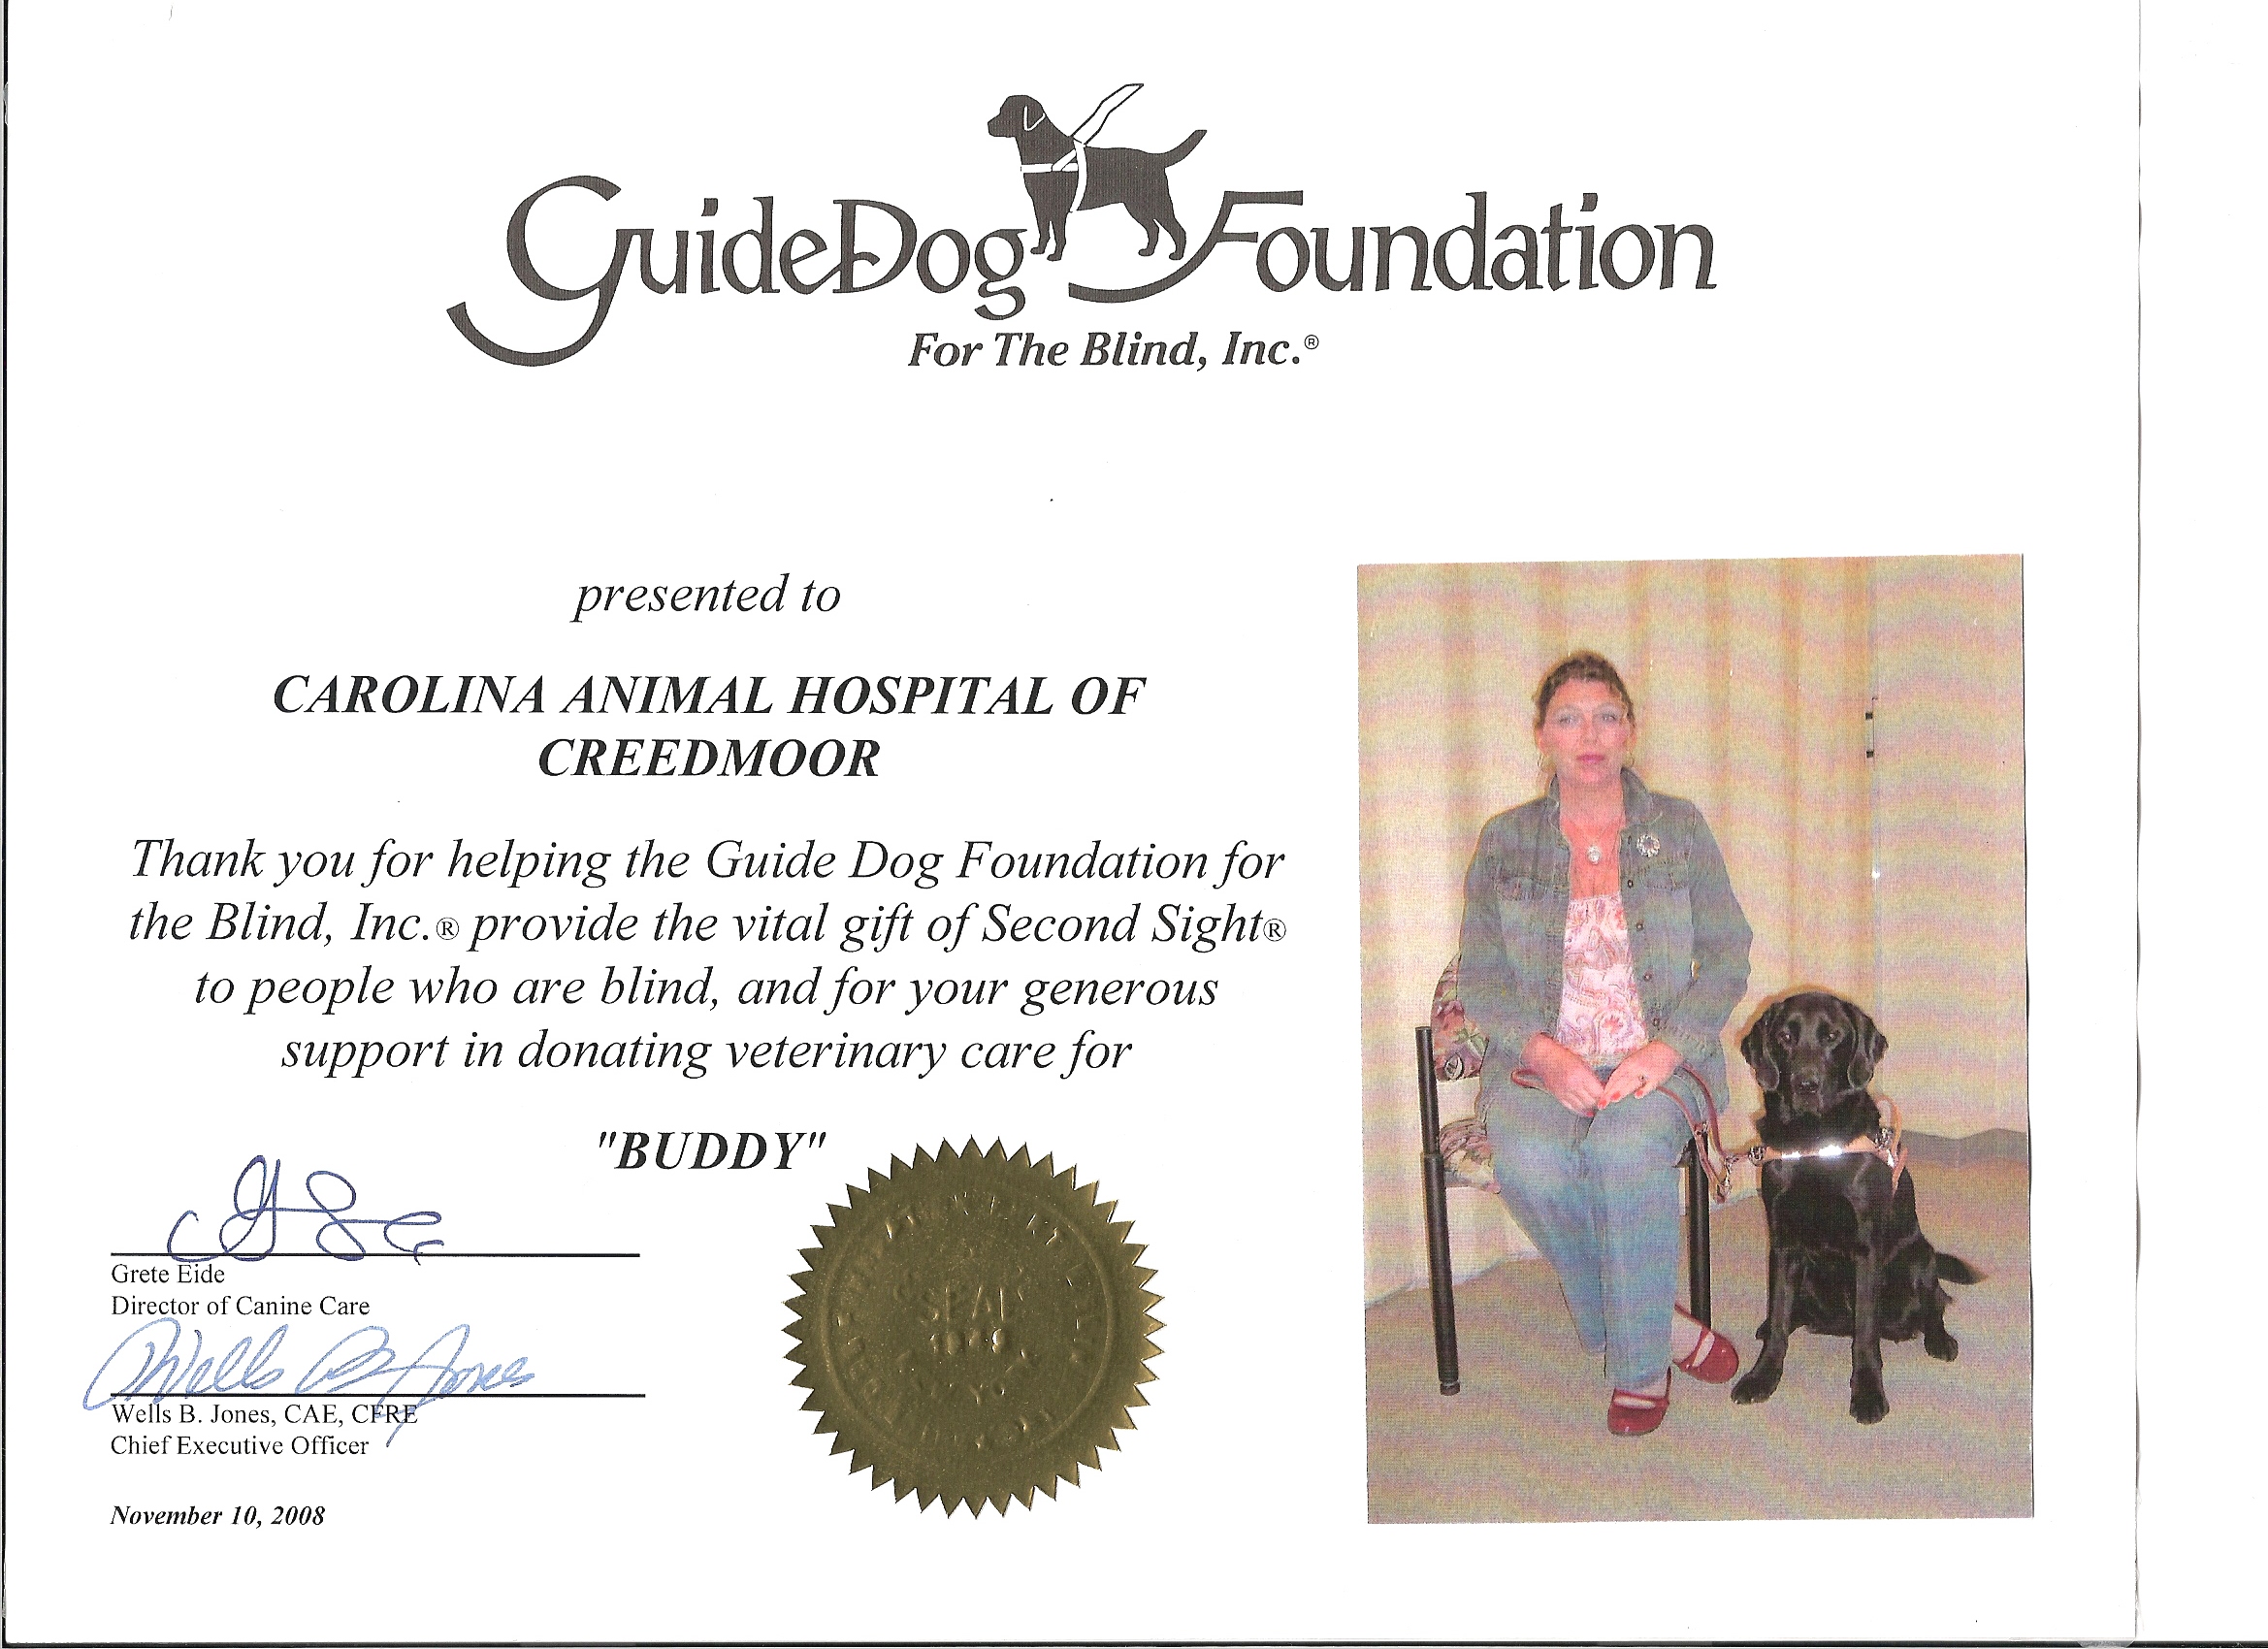 GuideDog Foundation for the Blind